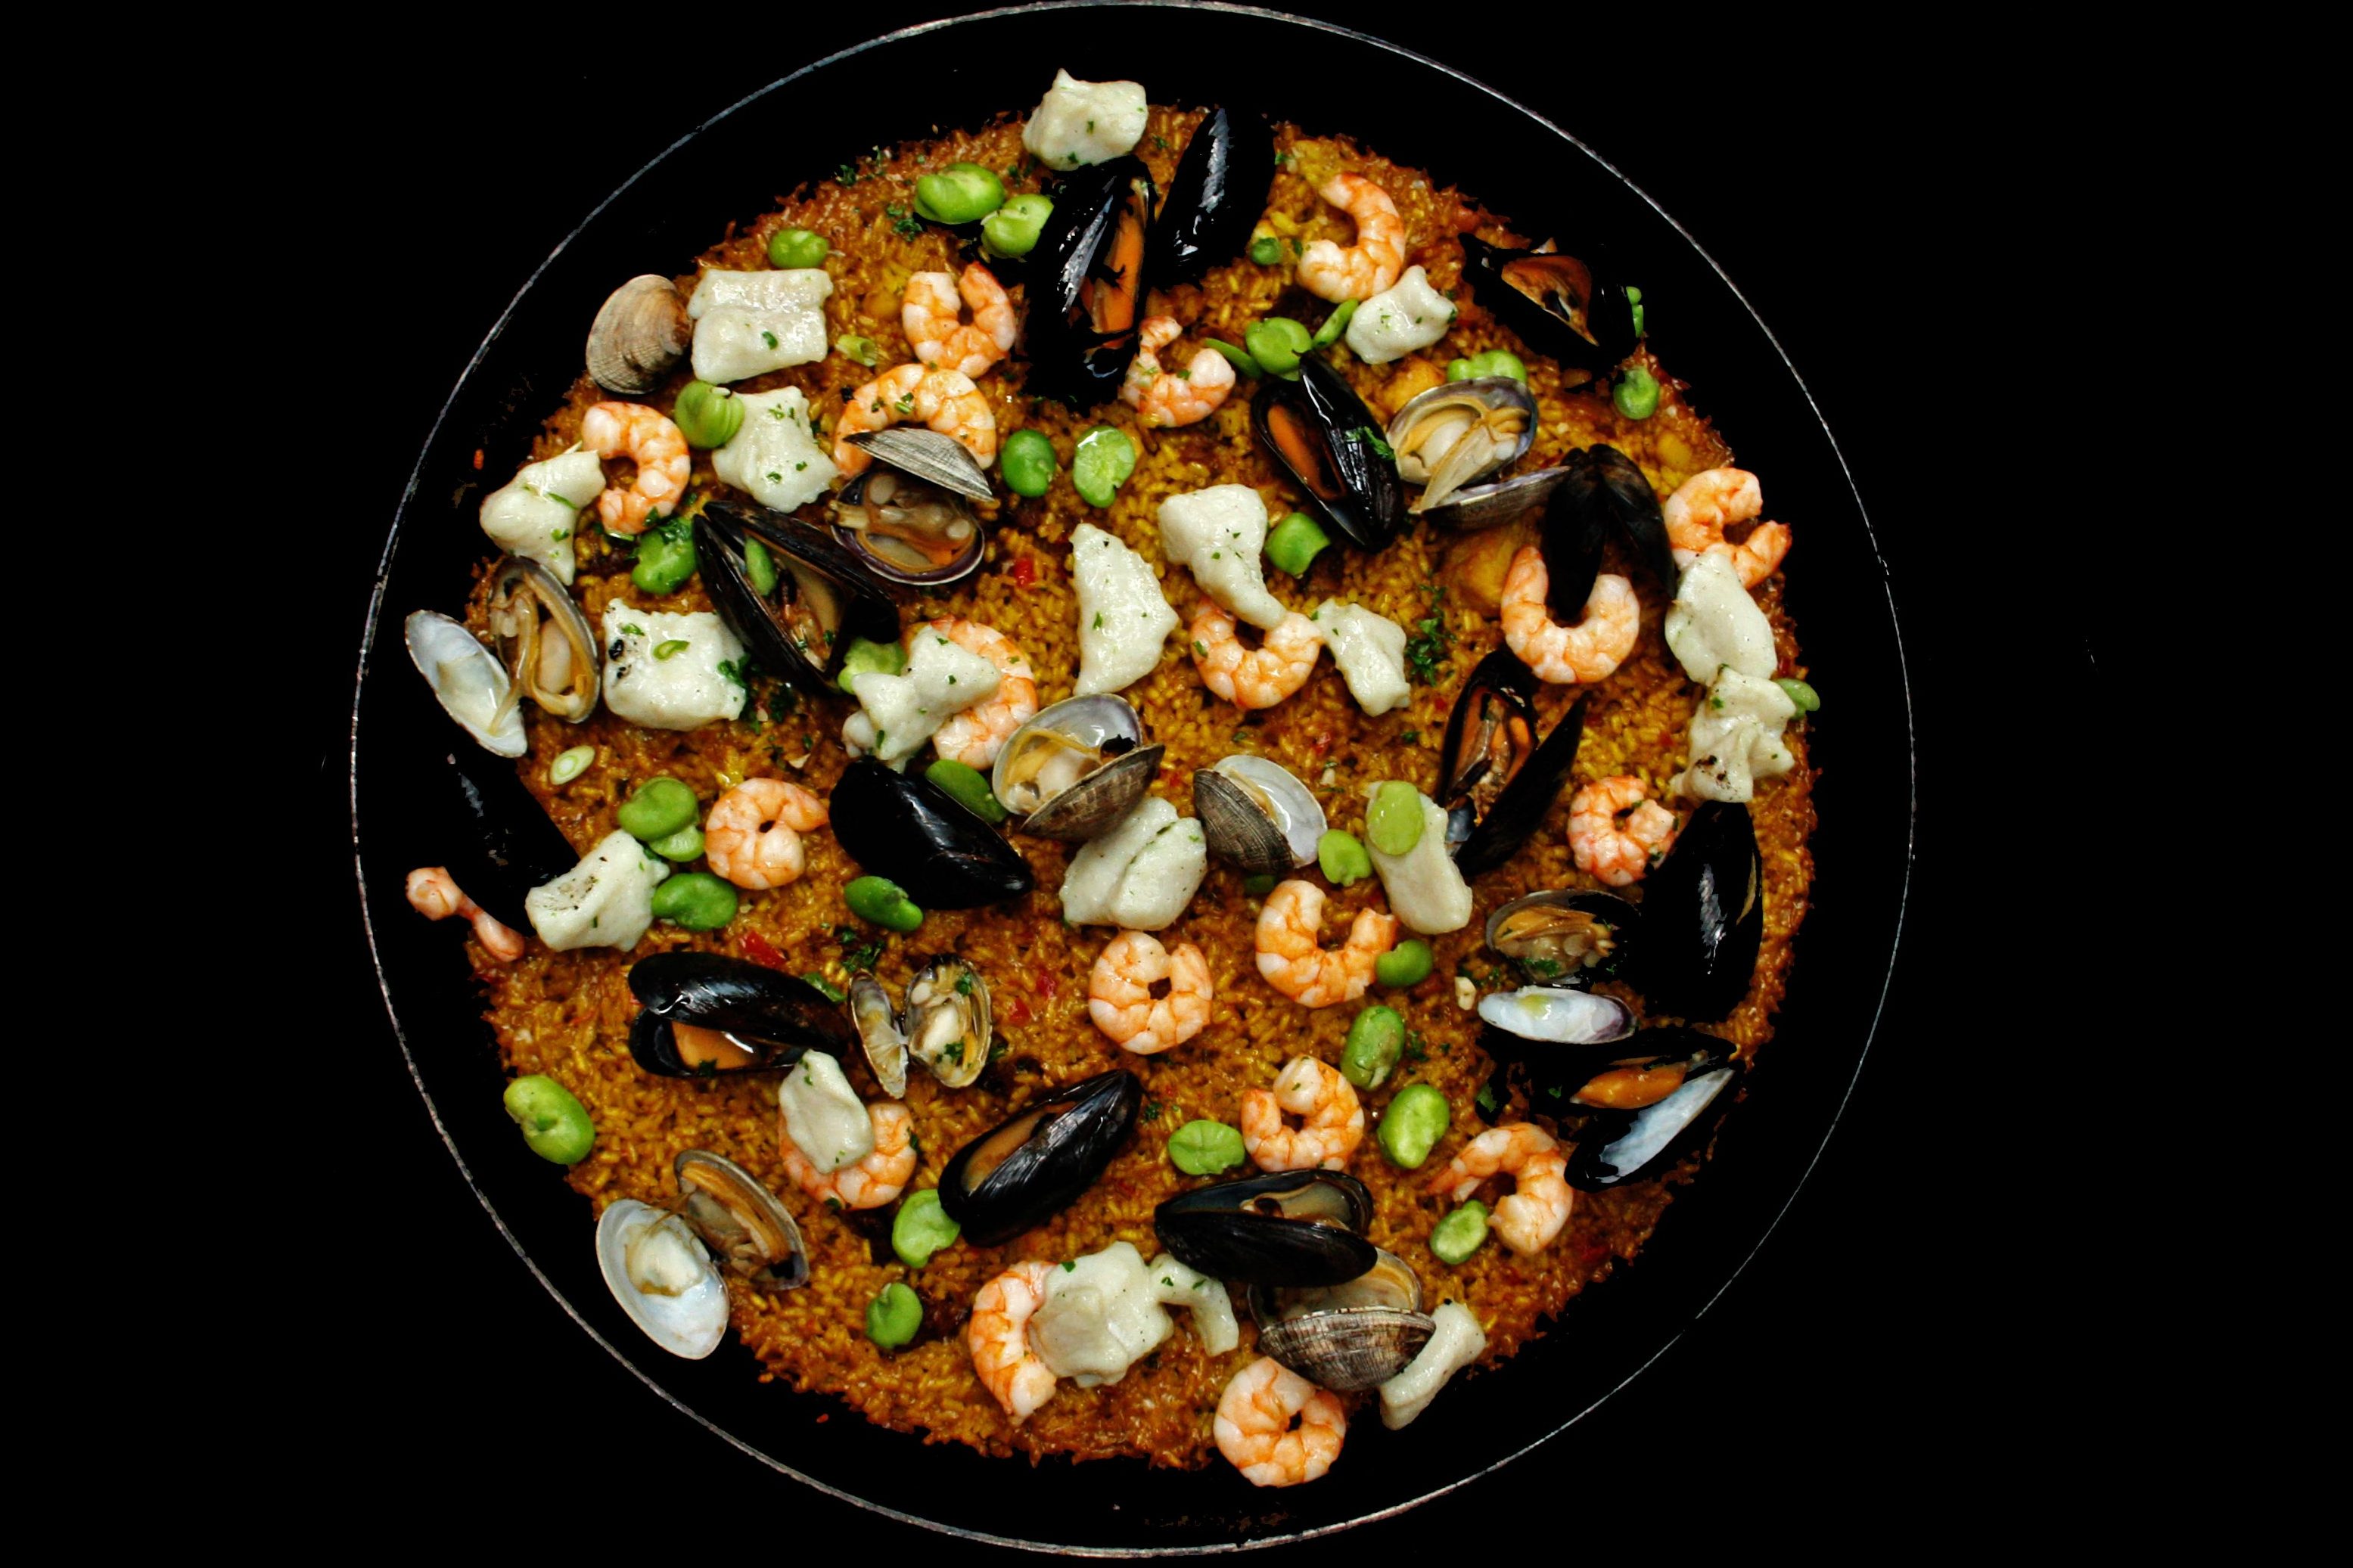 Portion size isn't an issue at NYC's Socarrat Paella Bar.